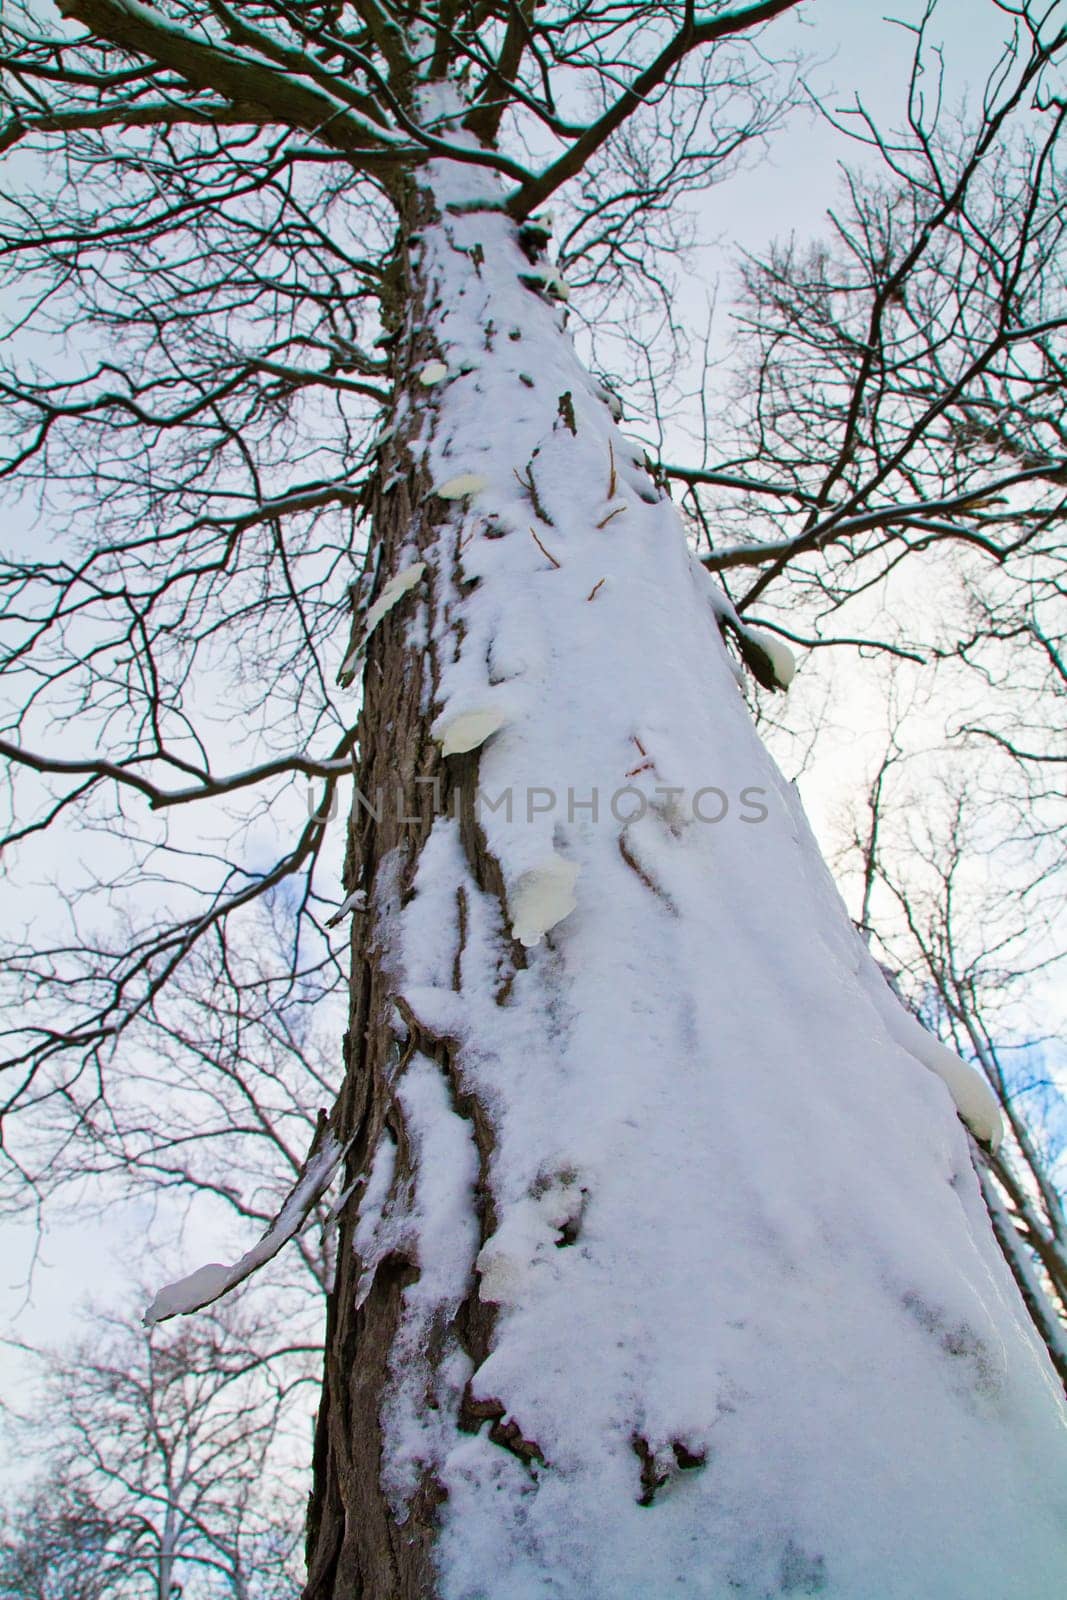 Snow-Covered Tree Trunk and Bare Branches Against Winter Sky in Indiana by njproductions